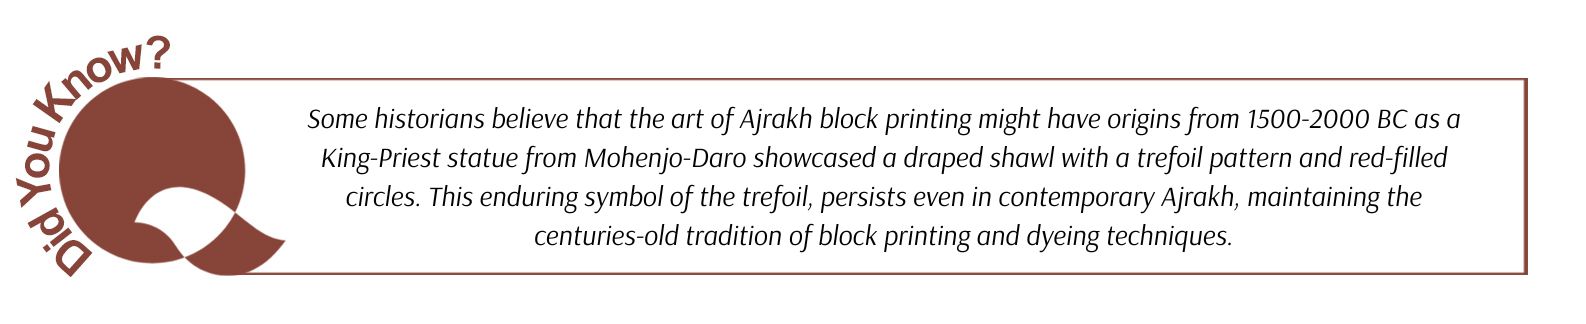 Some historians believe that the art of Ajrakh block printing might have origins from 1500-2000 BC as a King-Priest statue from Mohenjo-Daro showcased a draped shawl with a trefoil pattern and red-filled circles. This enduring symbol of the trefoil, persists even in contemporary Ajrakh, maintaining the centuries-old tradition of block printing and dyeing techniques.